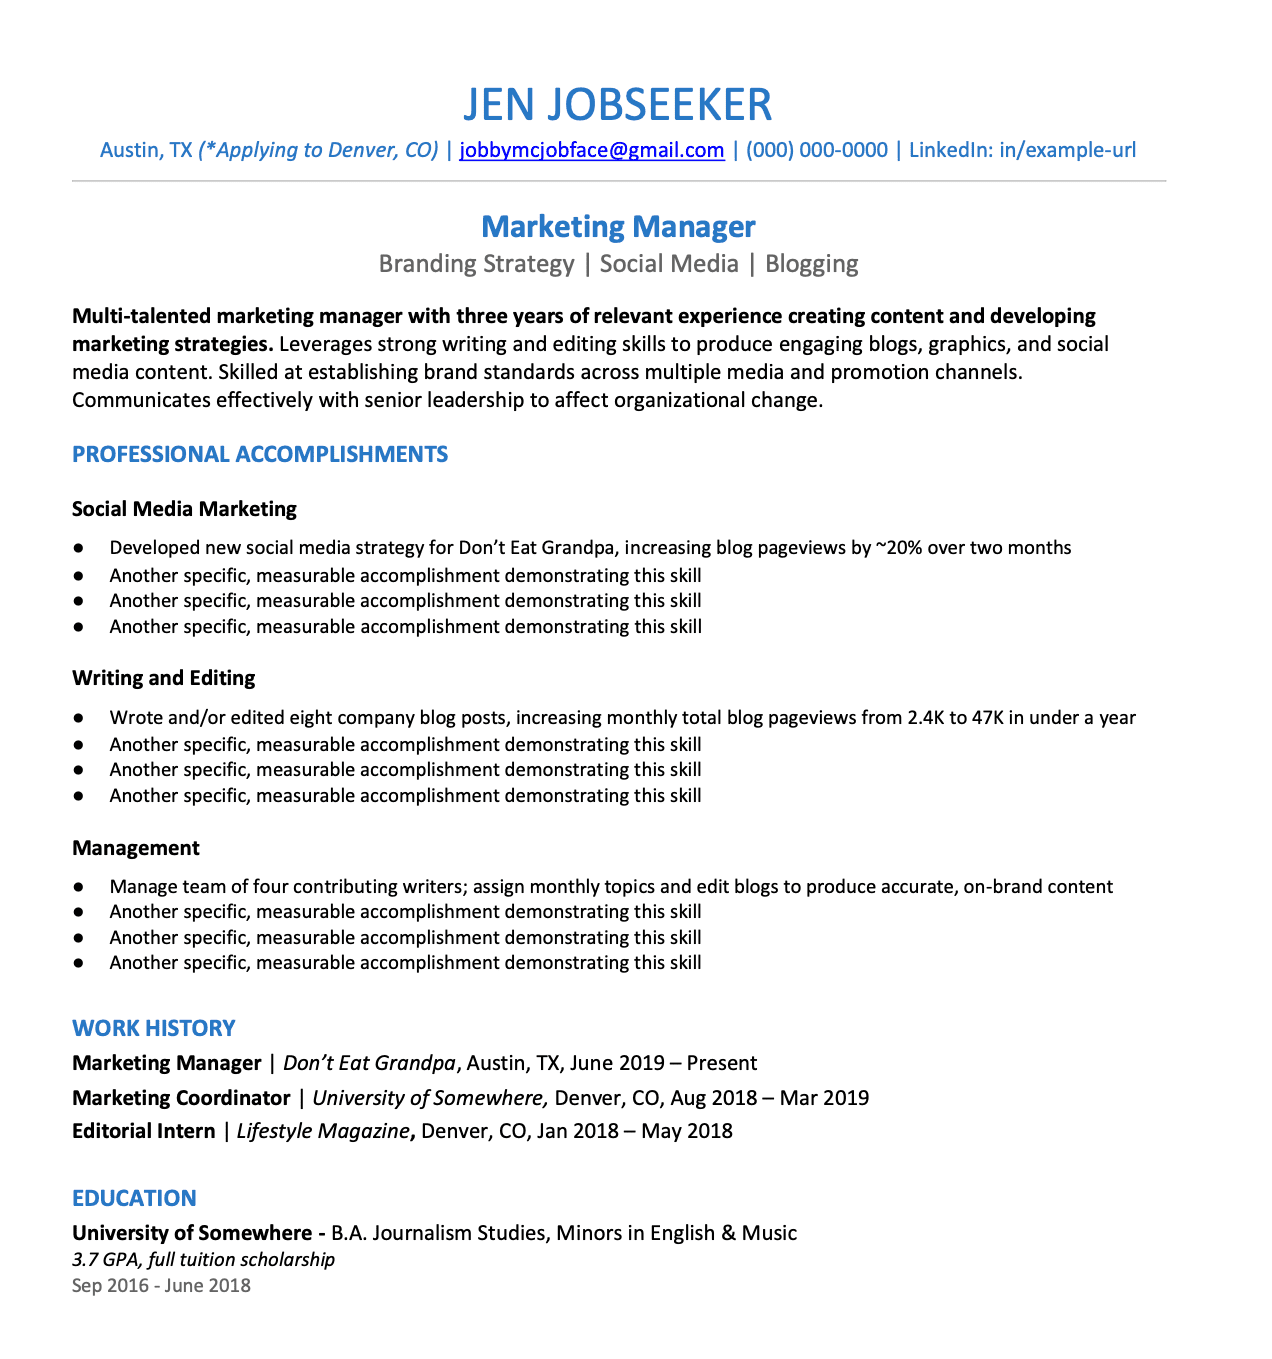 Most Functional Resumes Donât Work. Try This Example Instead.